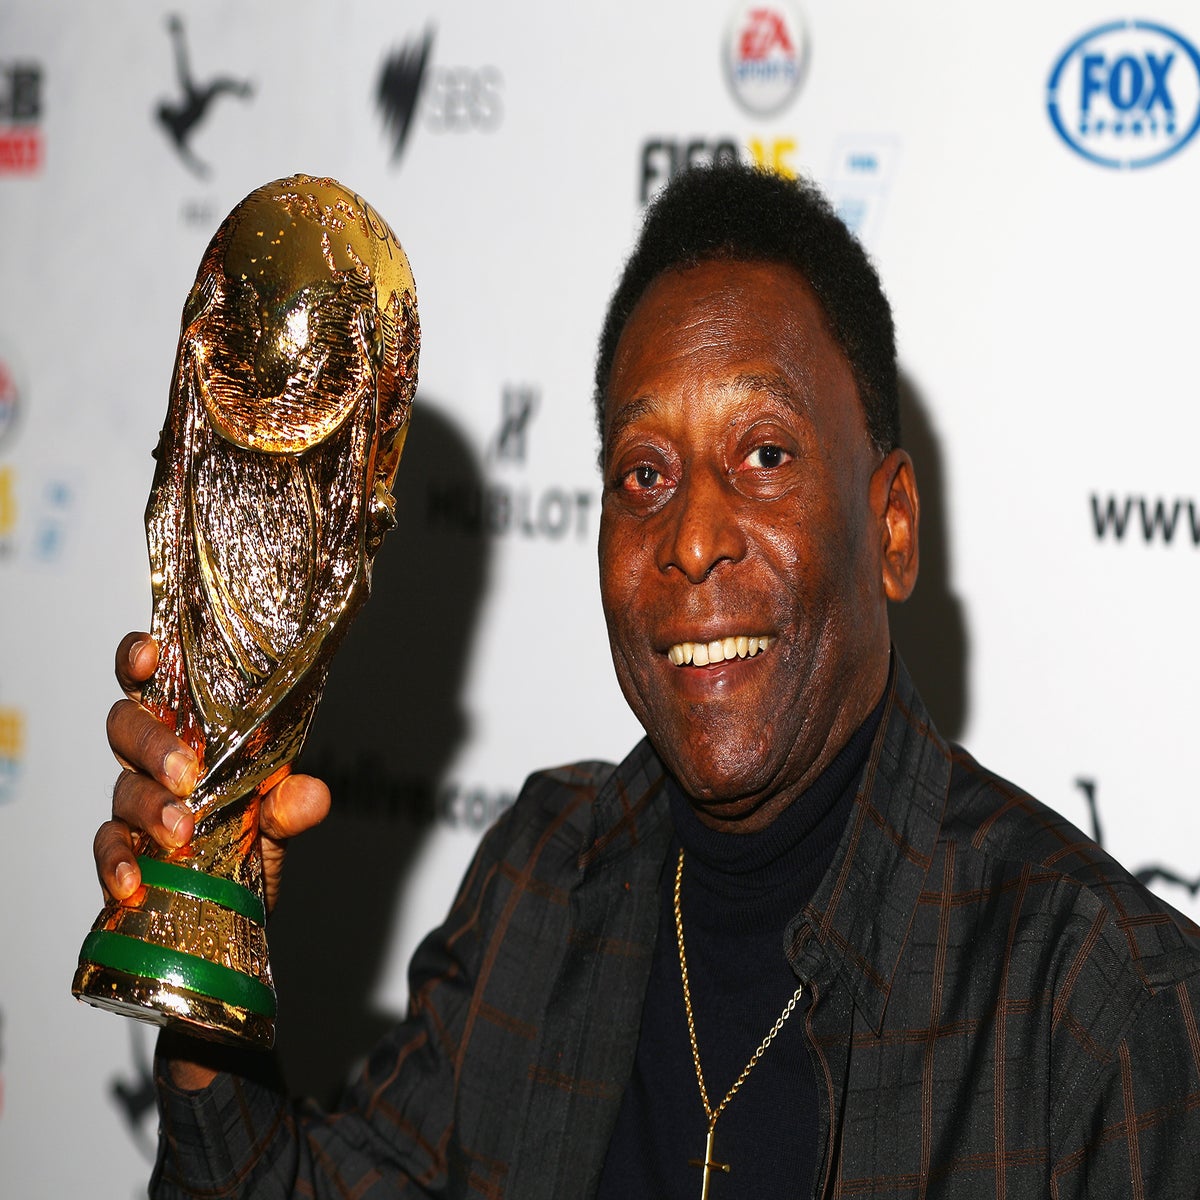 Lionel Messi, Maradona, and Pele: Who is greatest player of all time?